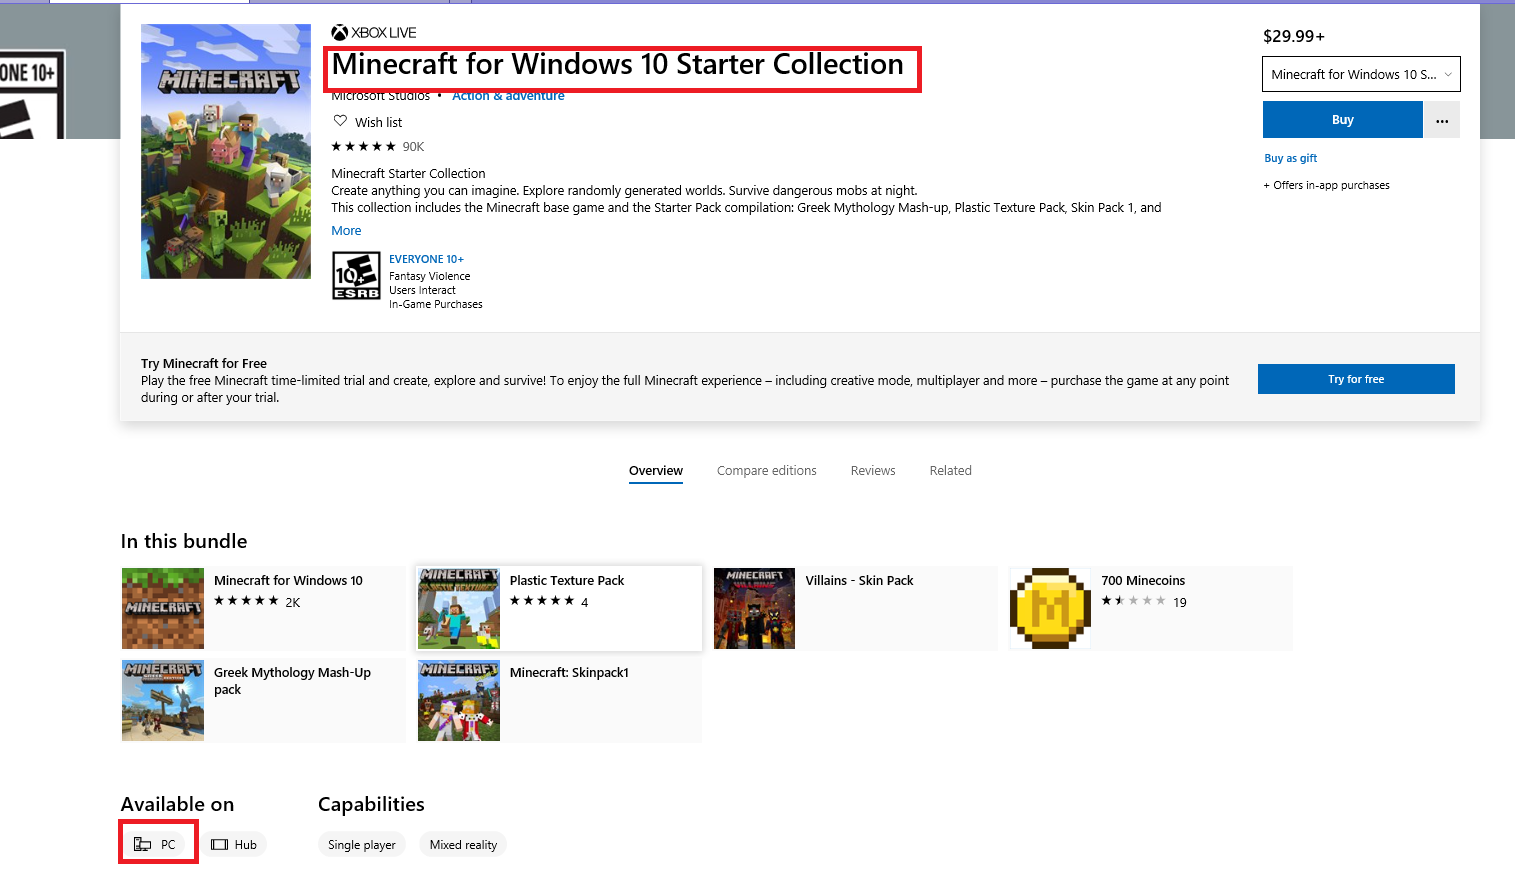 Unable to download and install Minecraft for Windows 10 - Starter Edition 3786f464-ee7e-4458-88e7-56128929293b?upload=true.png